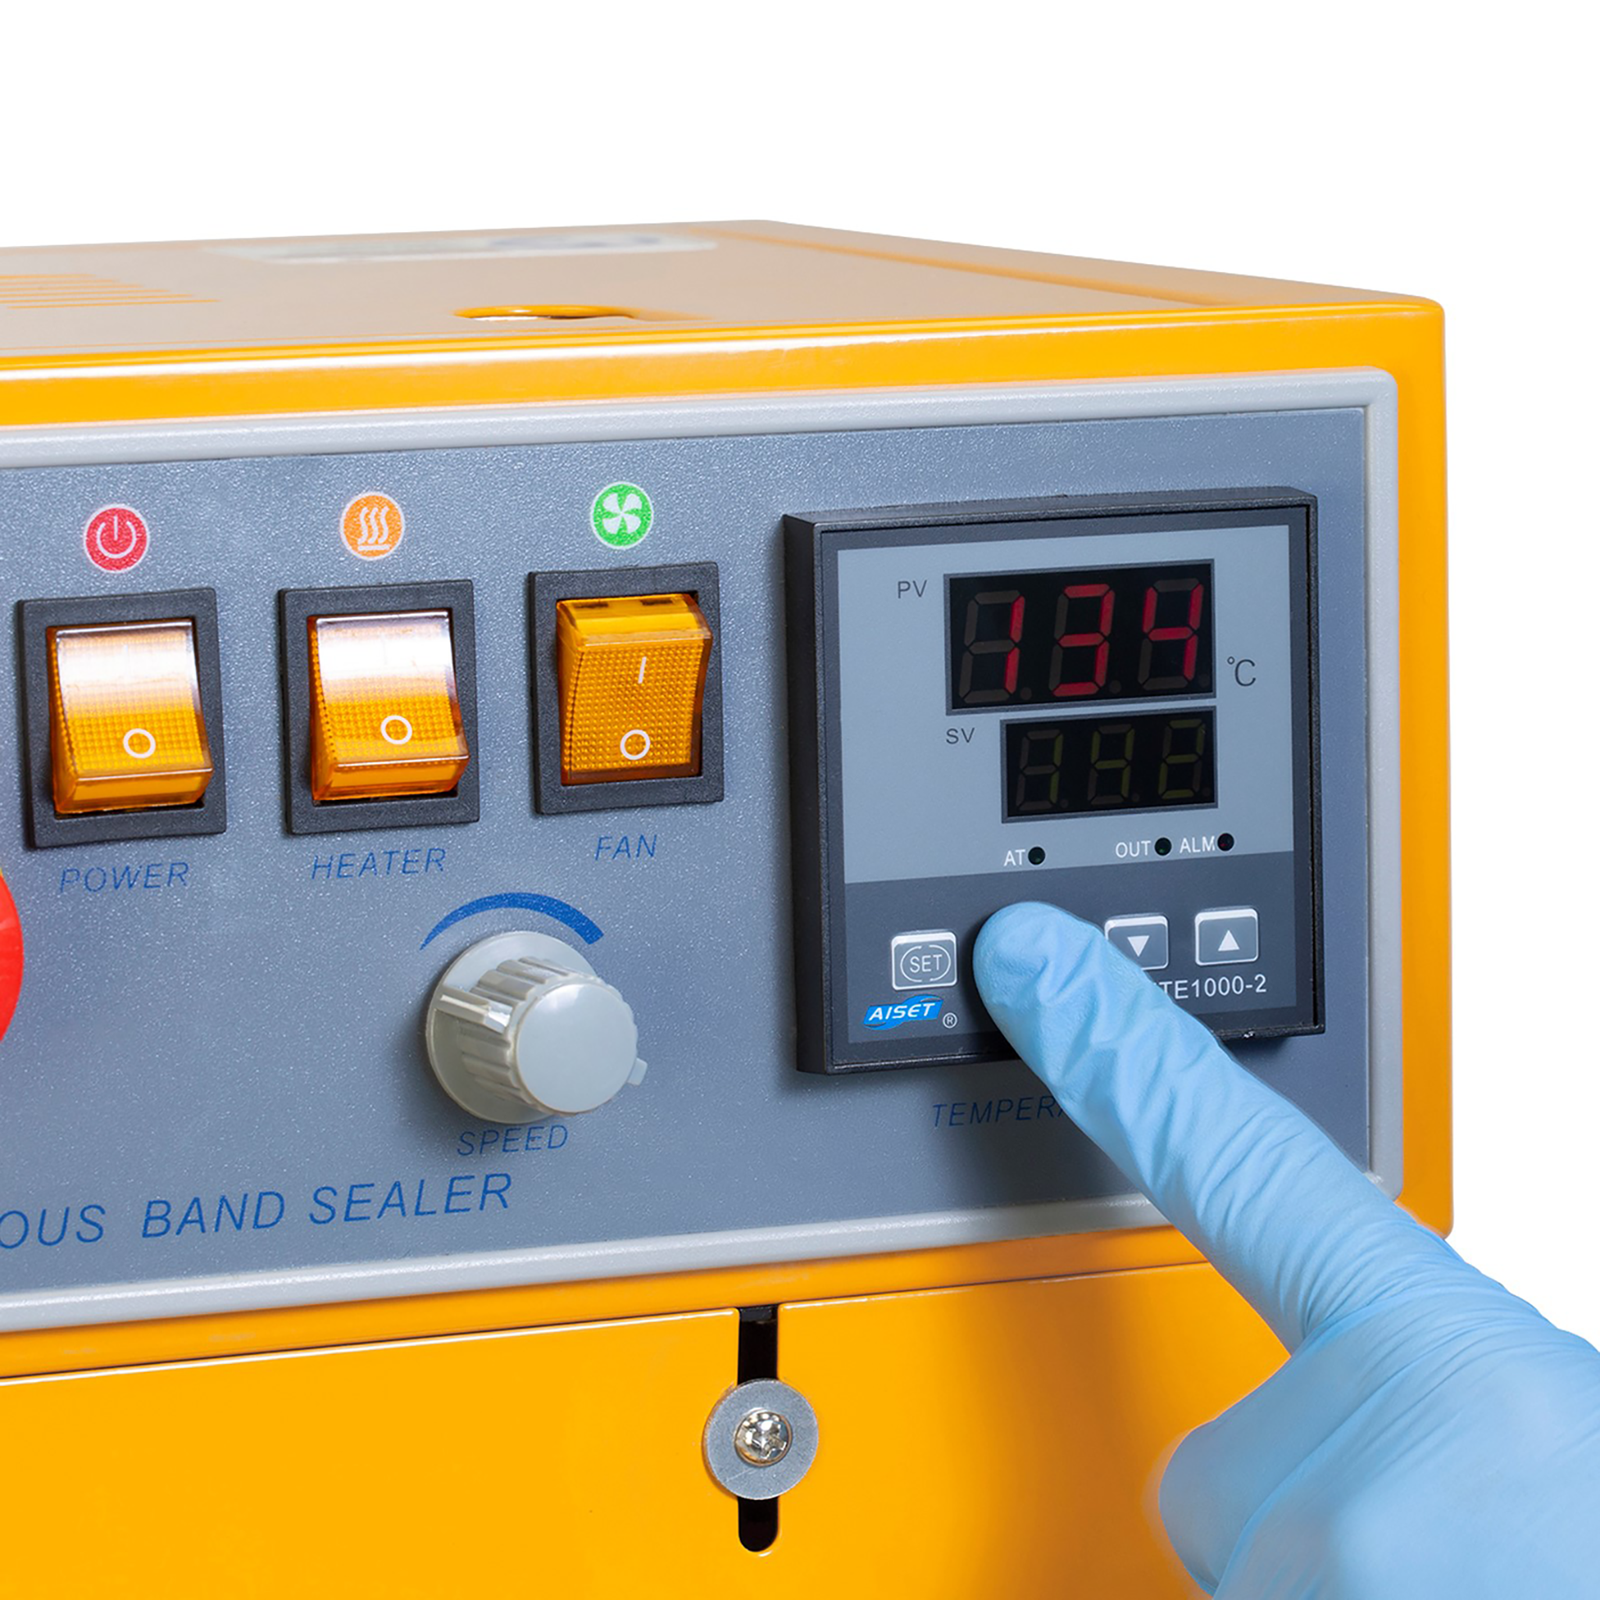 operator wearing blue gloves adjusting temperature on the analog dial on control panel of the Jorestech continuous band sealer